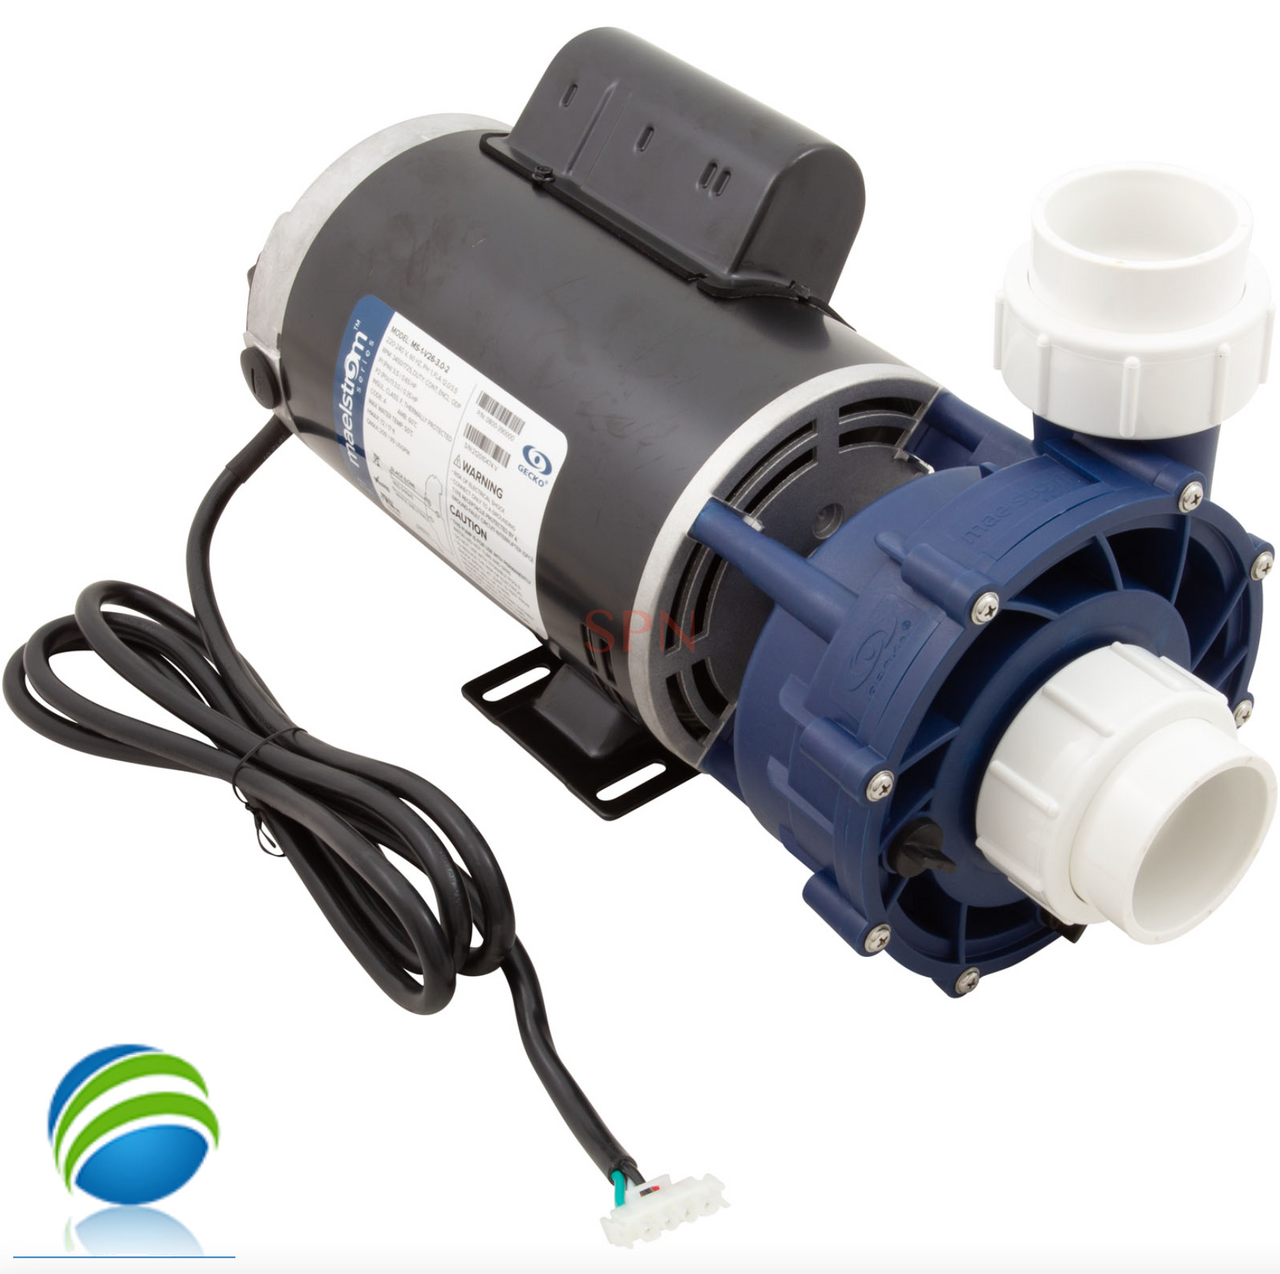 Complete Pump, Aqua-Flo, Maelstrom, 3.0HP, 230v, 56fr, 2"X 2" 1 or 2 Speed 12A
The inlet and outlet measures about 3" across the threads.